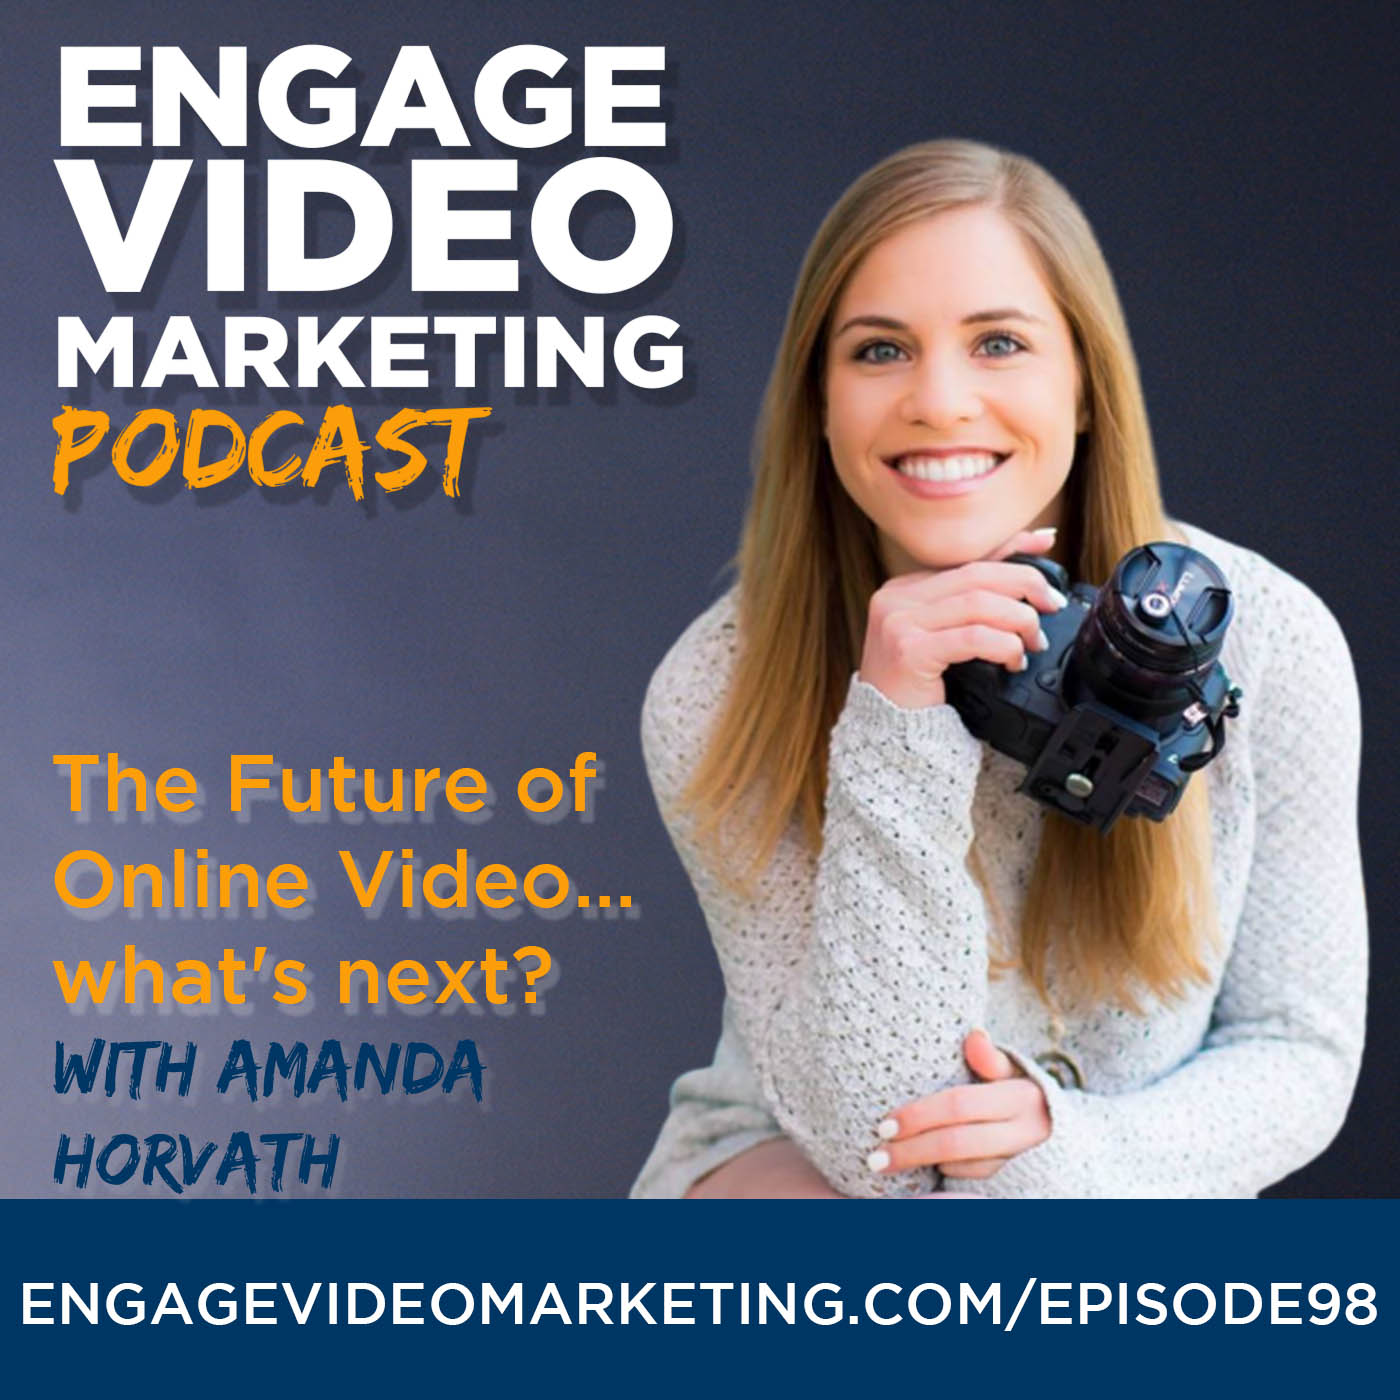 The Future of Online Video… what’s next? (with Amanda Horvath)